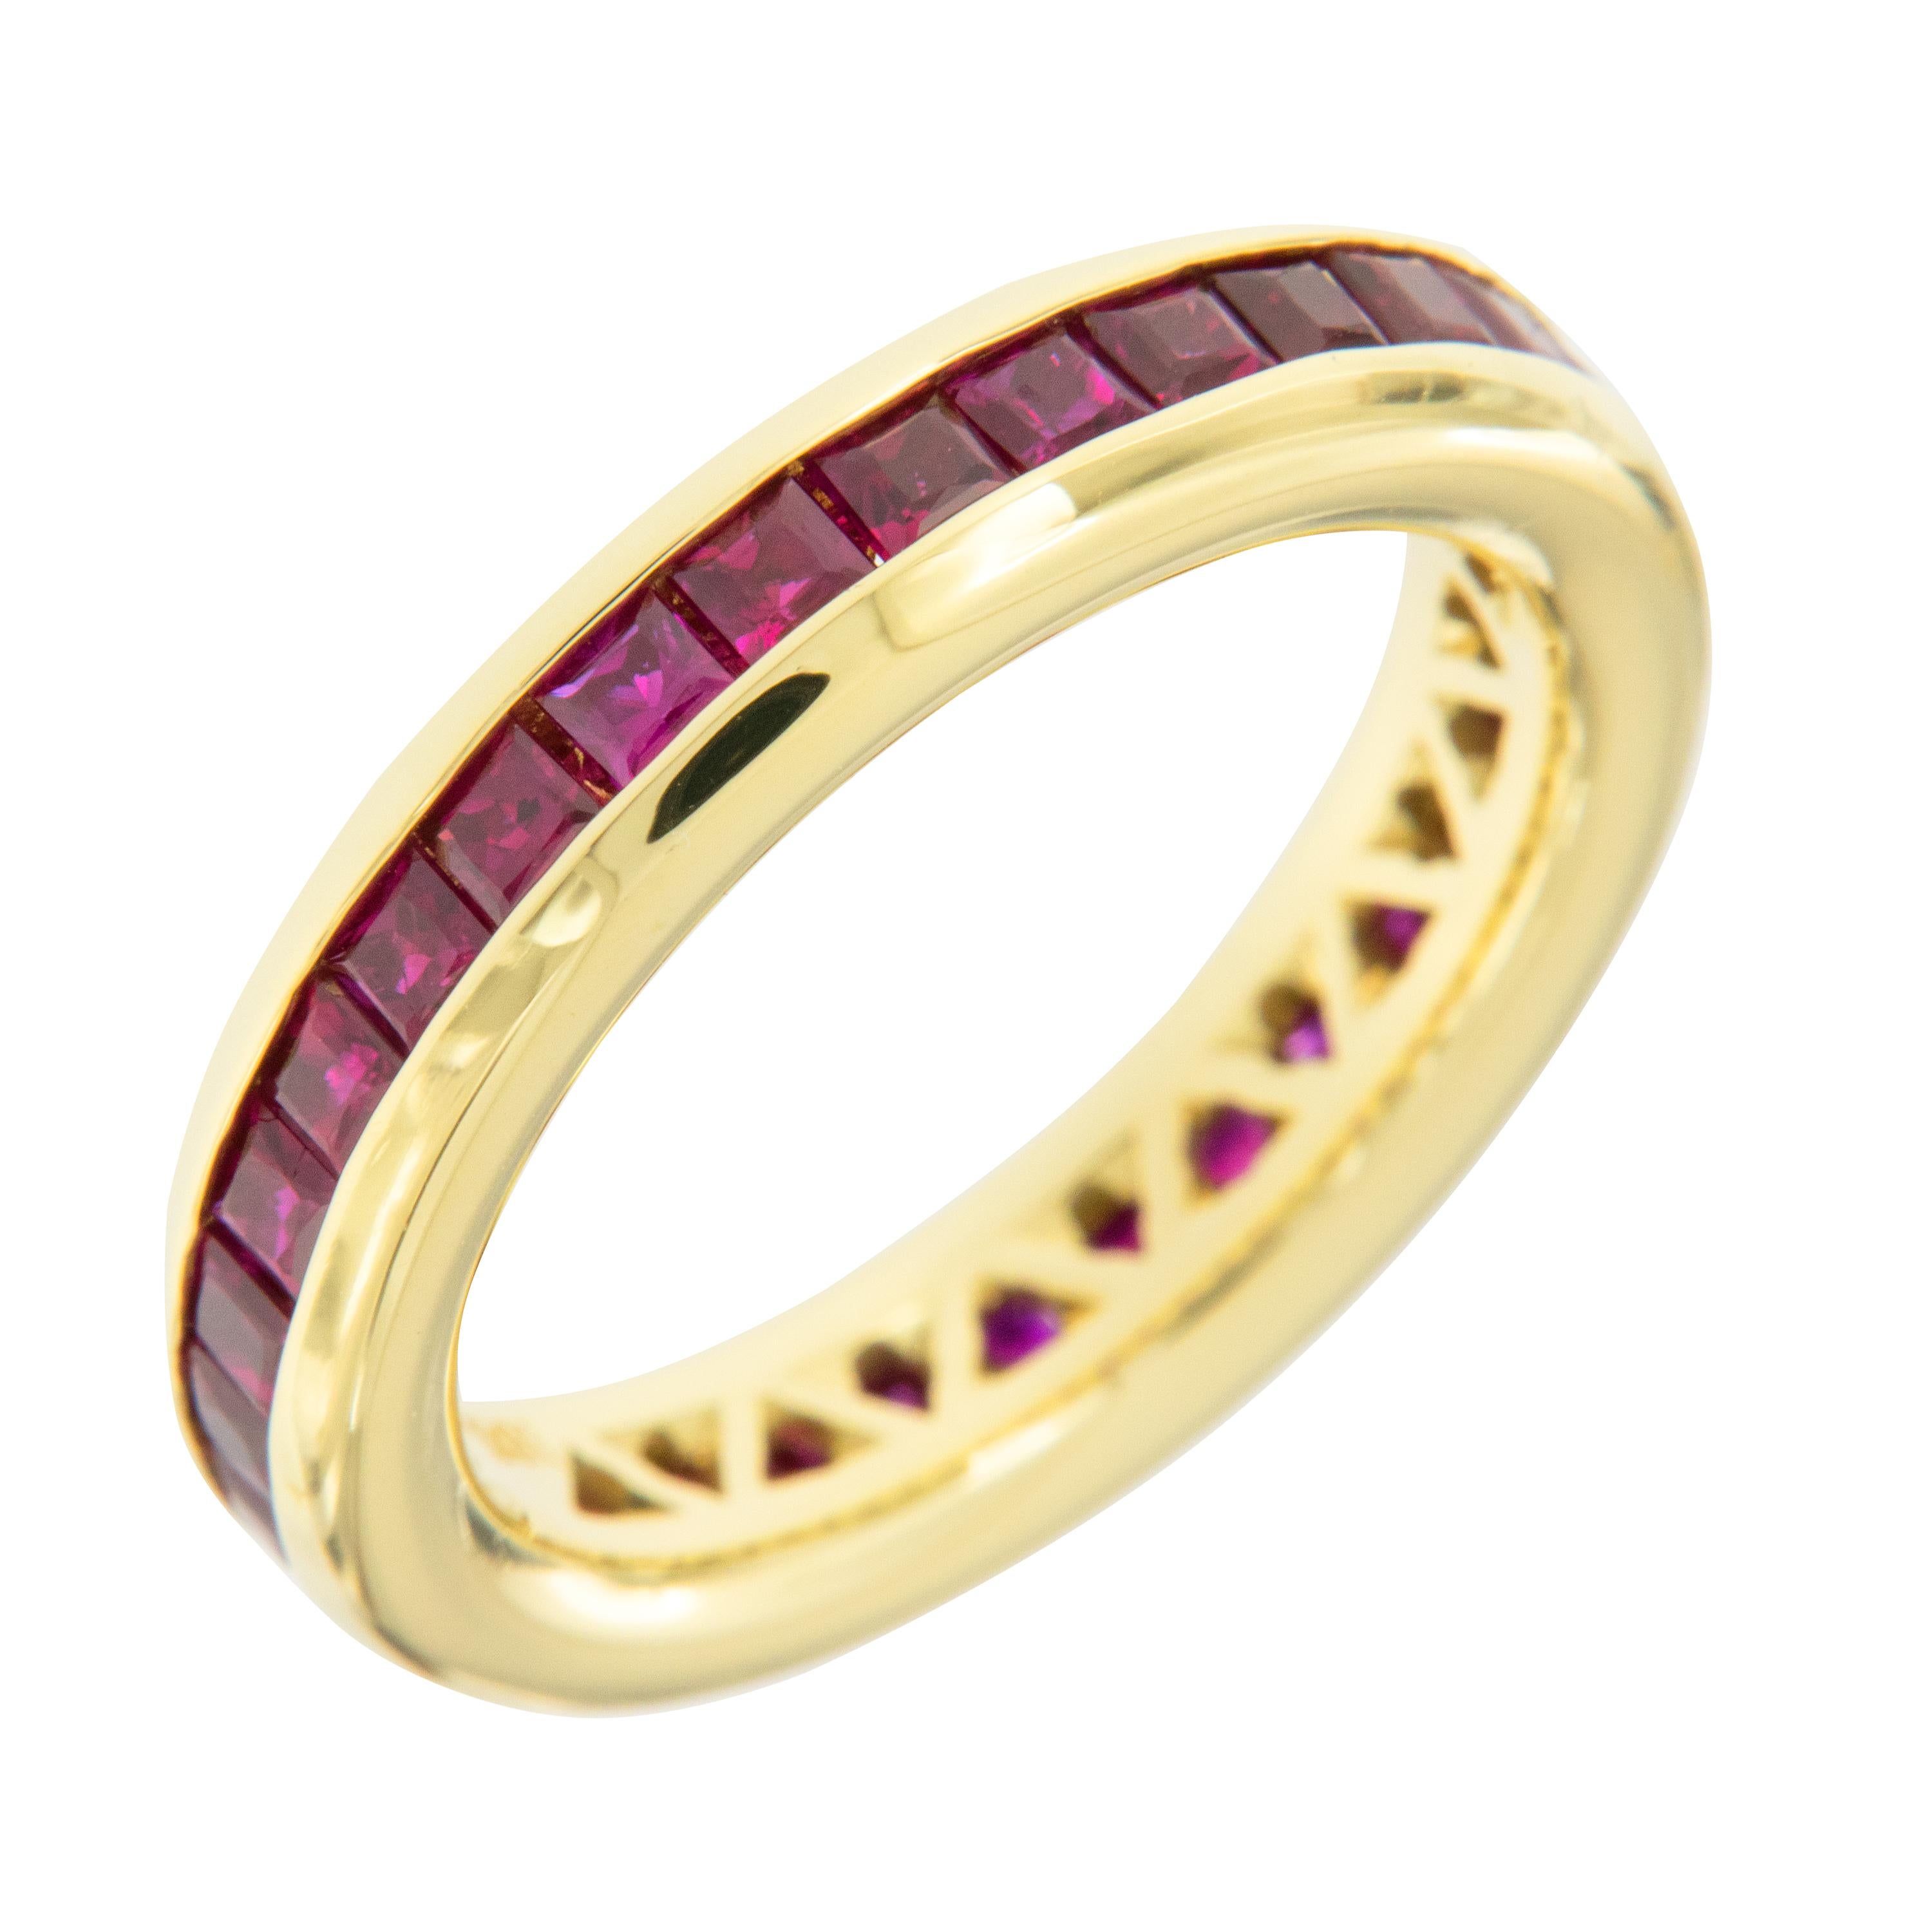 Expertly hand fabricated ring in royal 18 karat yellow gold with perfectly channel set 2.50 Cttw princess cut rubies by William Rosenberg. The classic color combination of fine red rubies & royal 18 karat yellow gold will always be a knockout! This